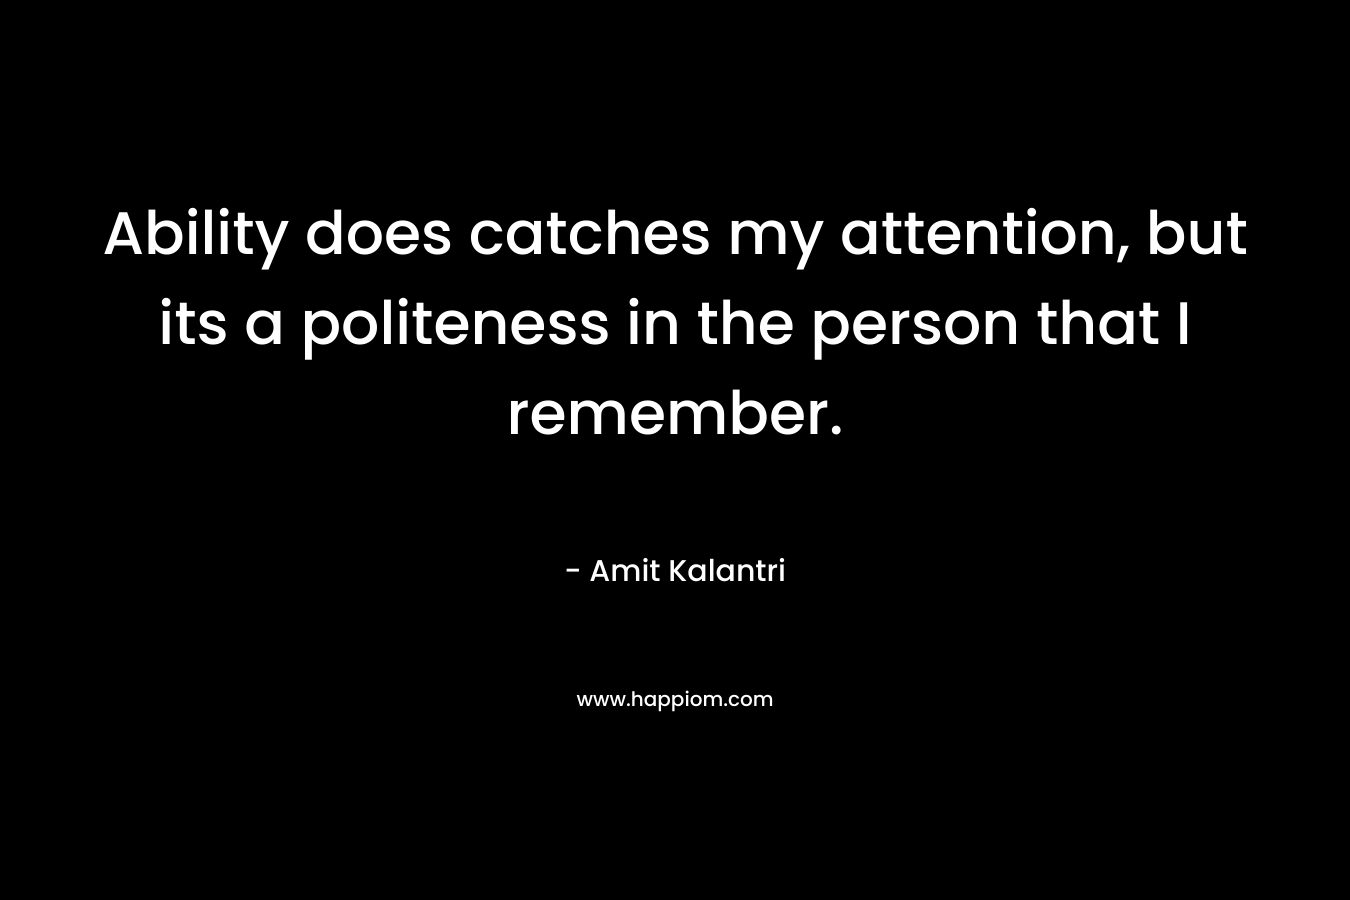 Ability does catches my attention, but its a politeness in the person that I remember. – Amit Kalantri